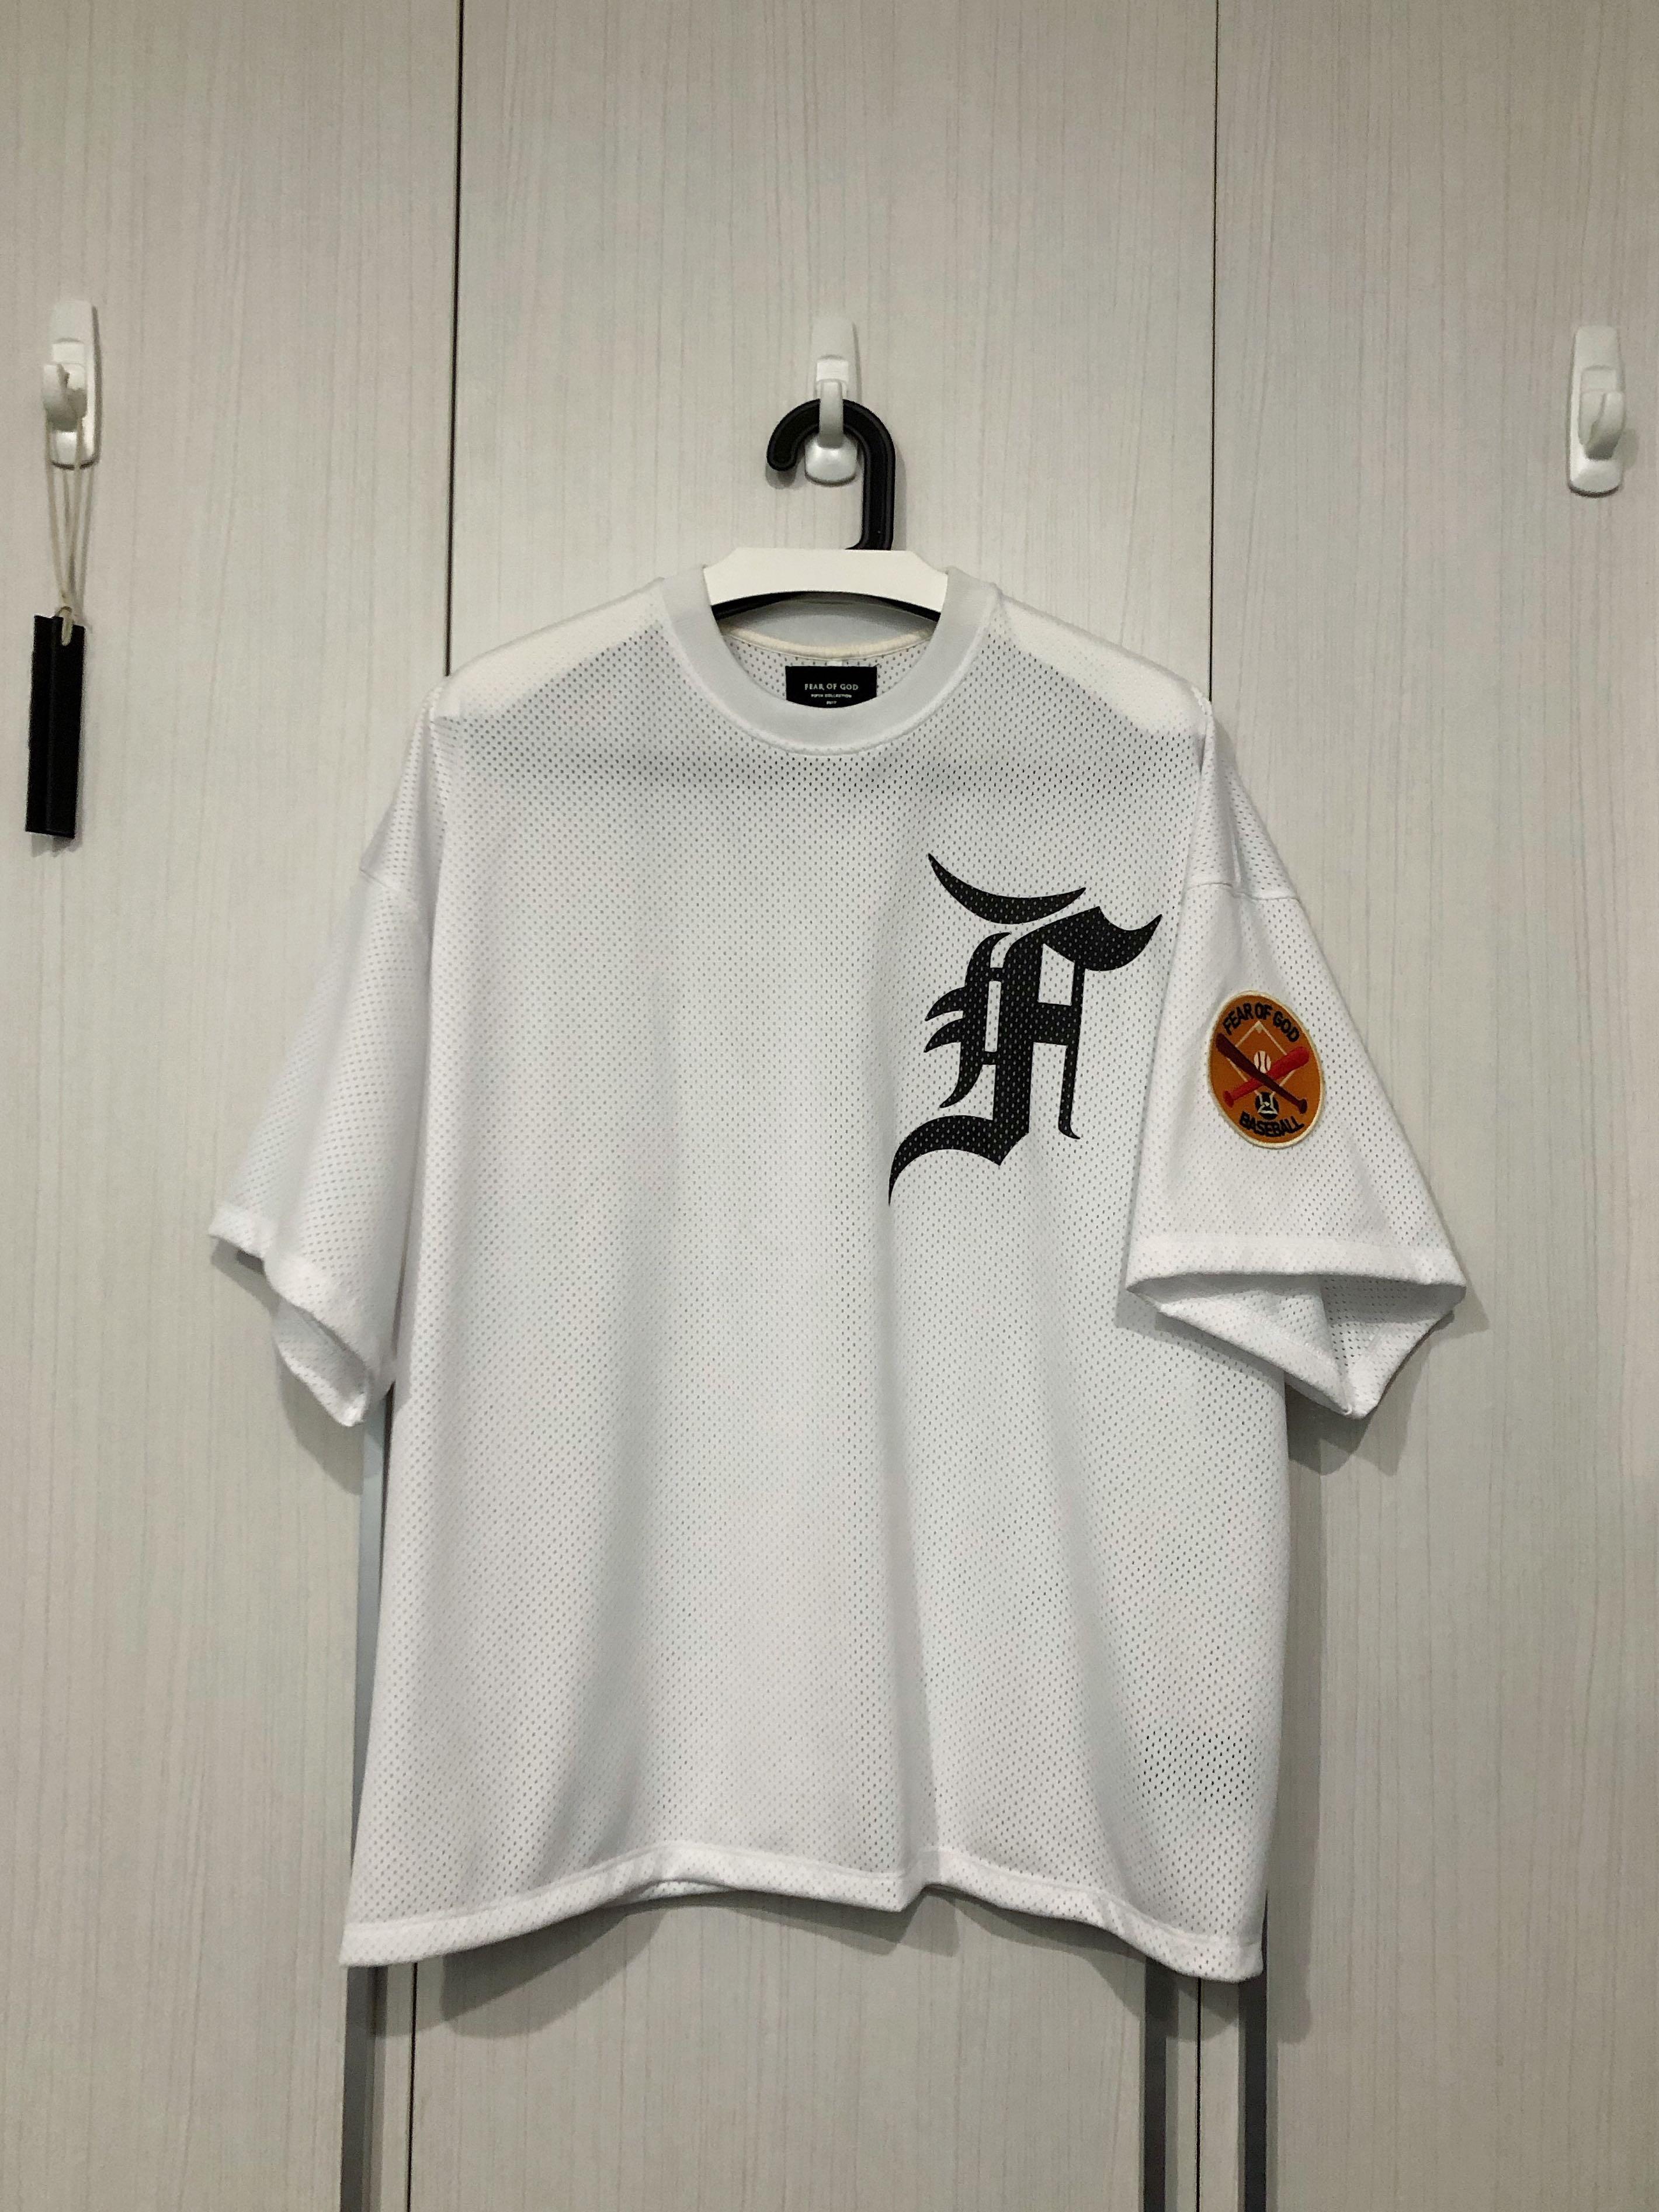 Size S / Fear Of God Mesh Jersey